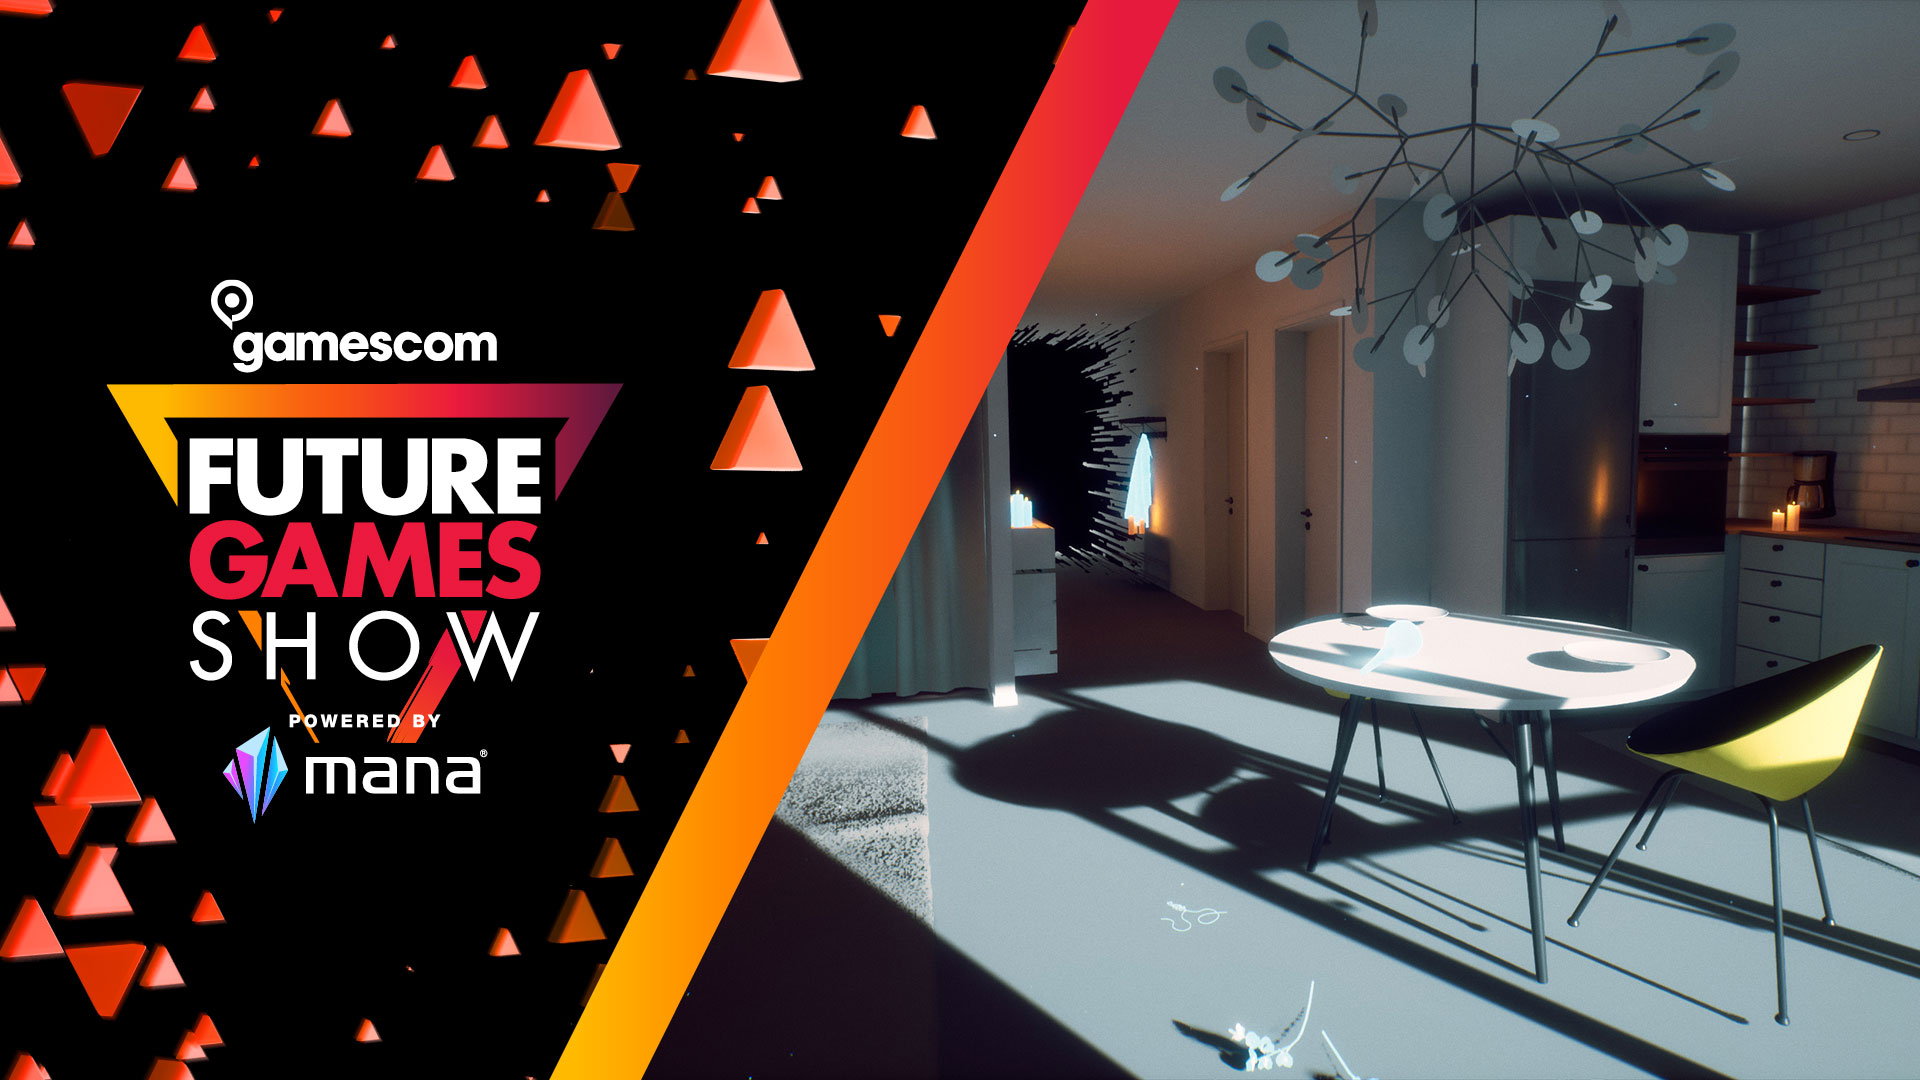 The Gap featuring at the Future Games Show Gamescom 22